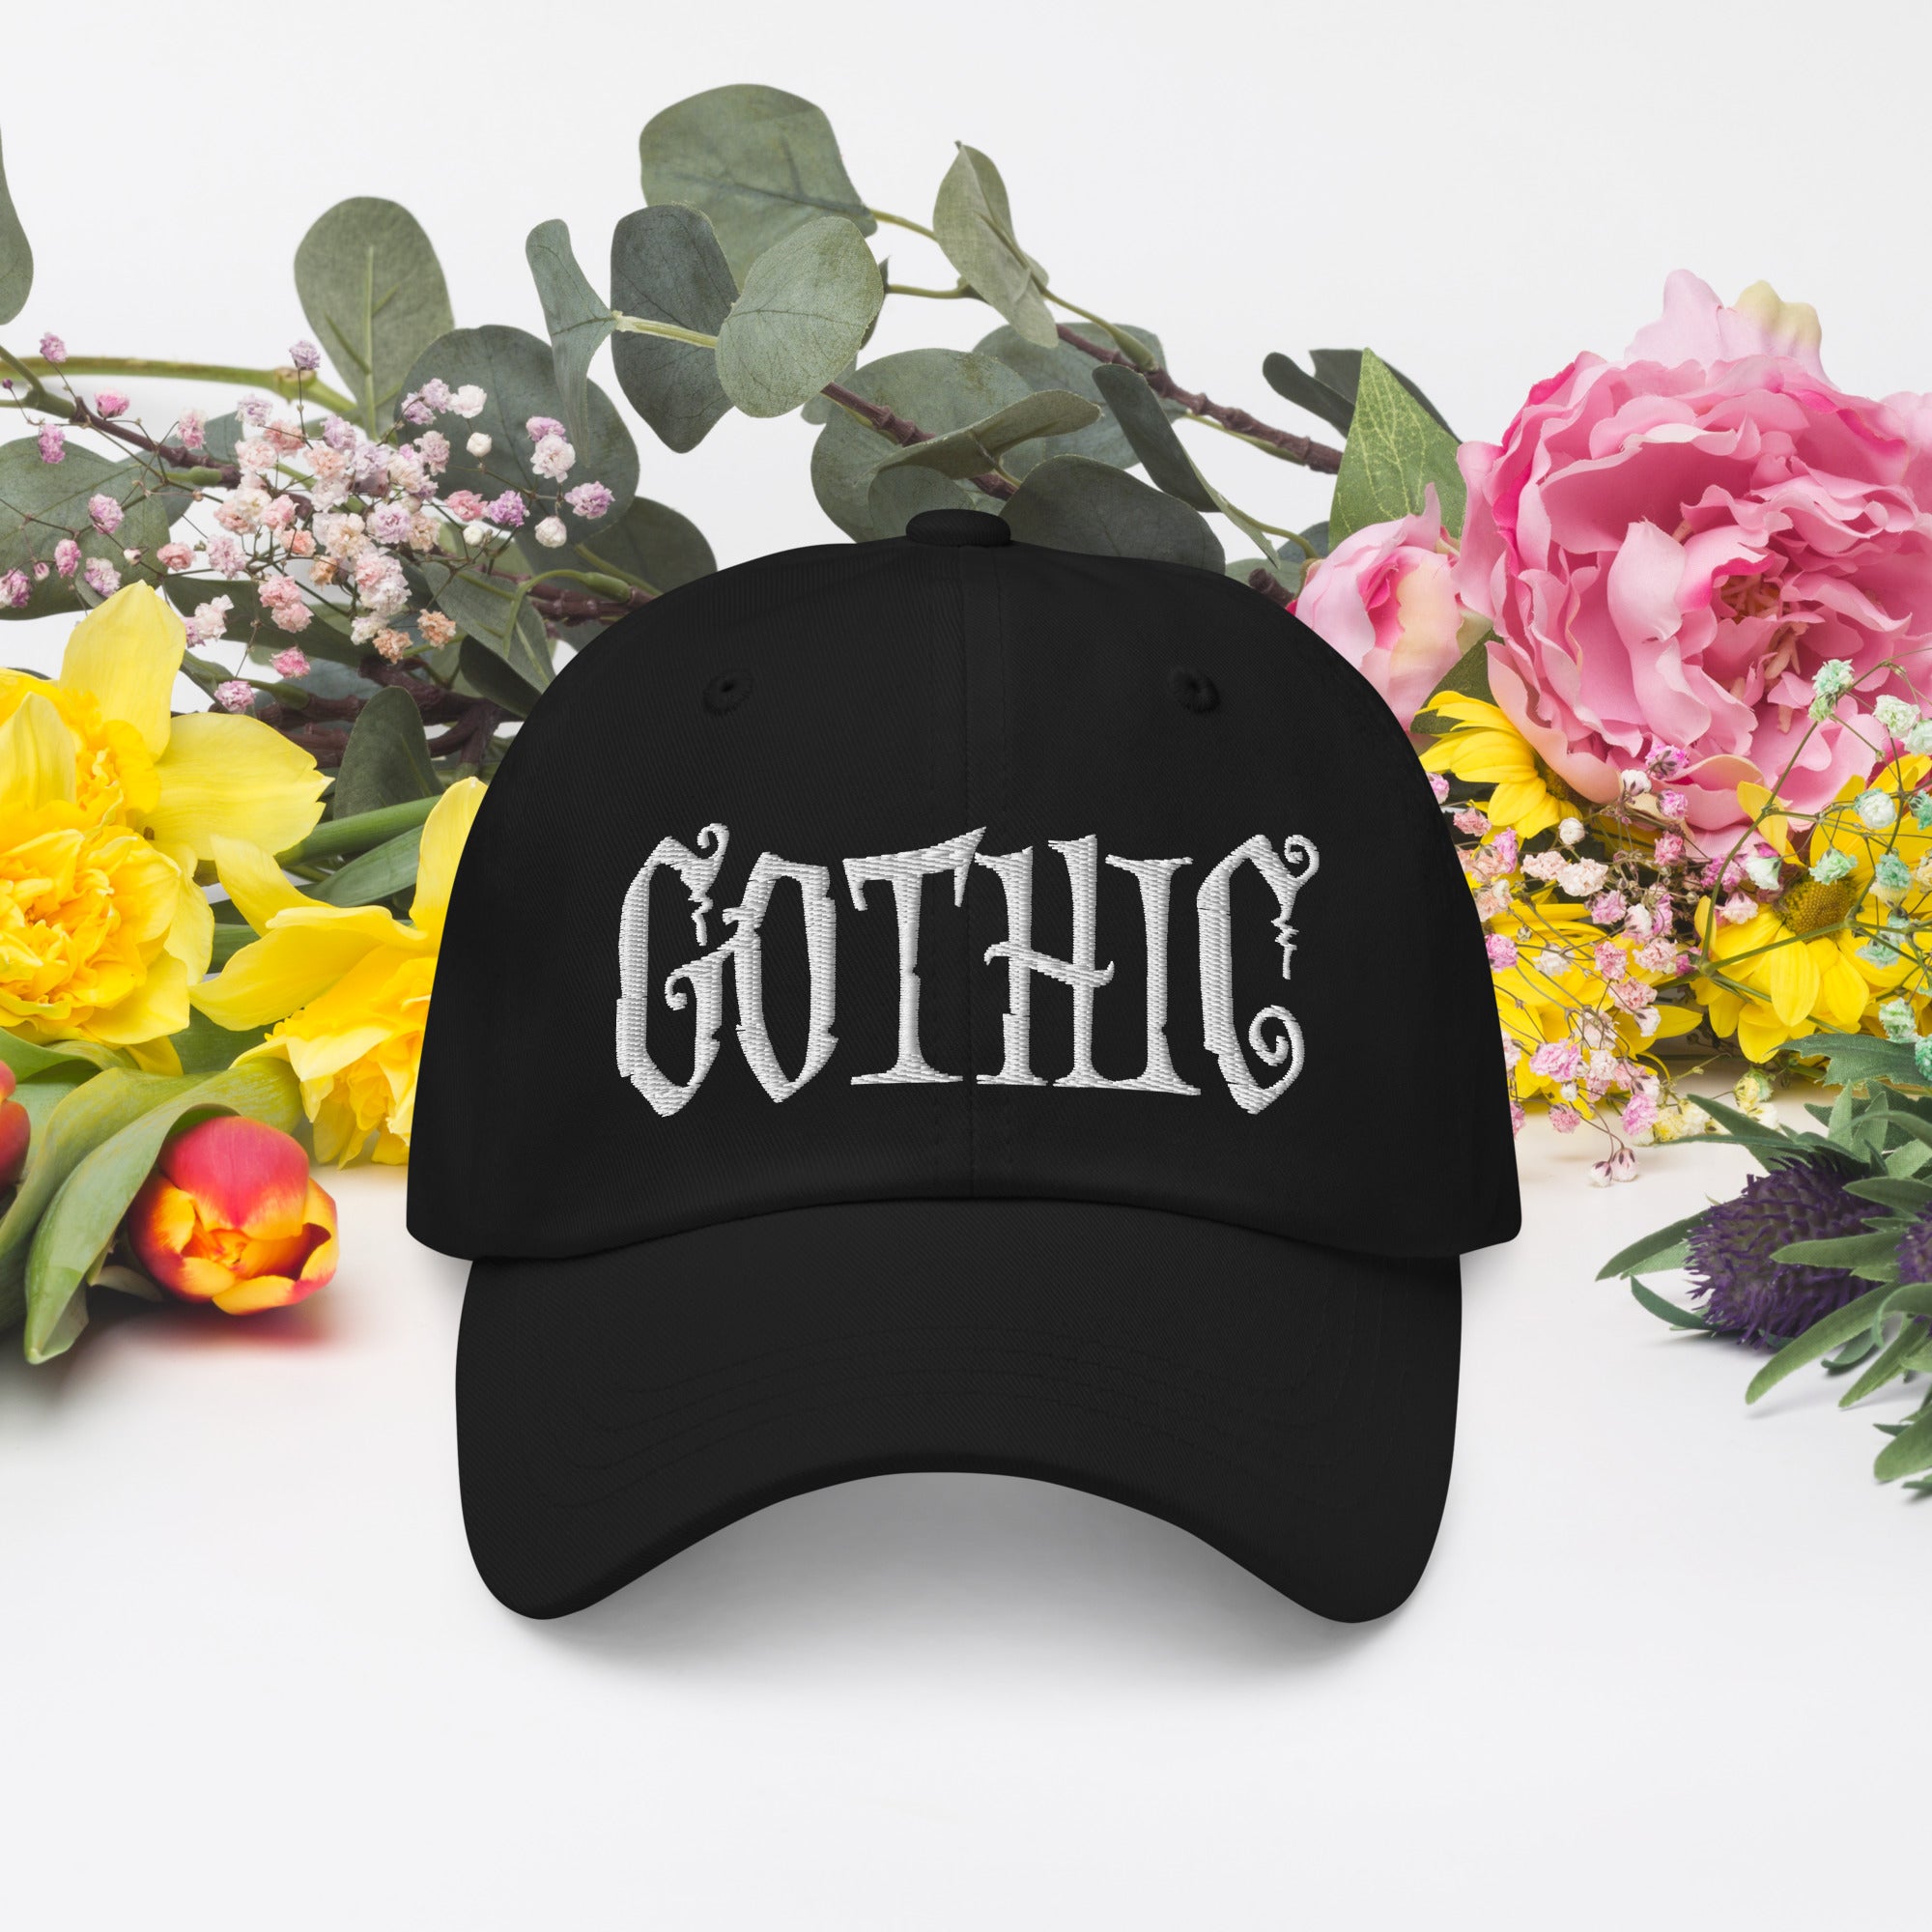 Gothic Dramatic Style Embroidered Baseball Cap Dark Goth Clothing White Thread Dad hat - Edge of Life Designs